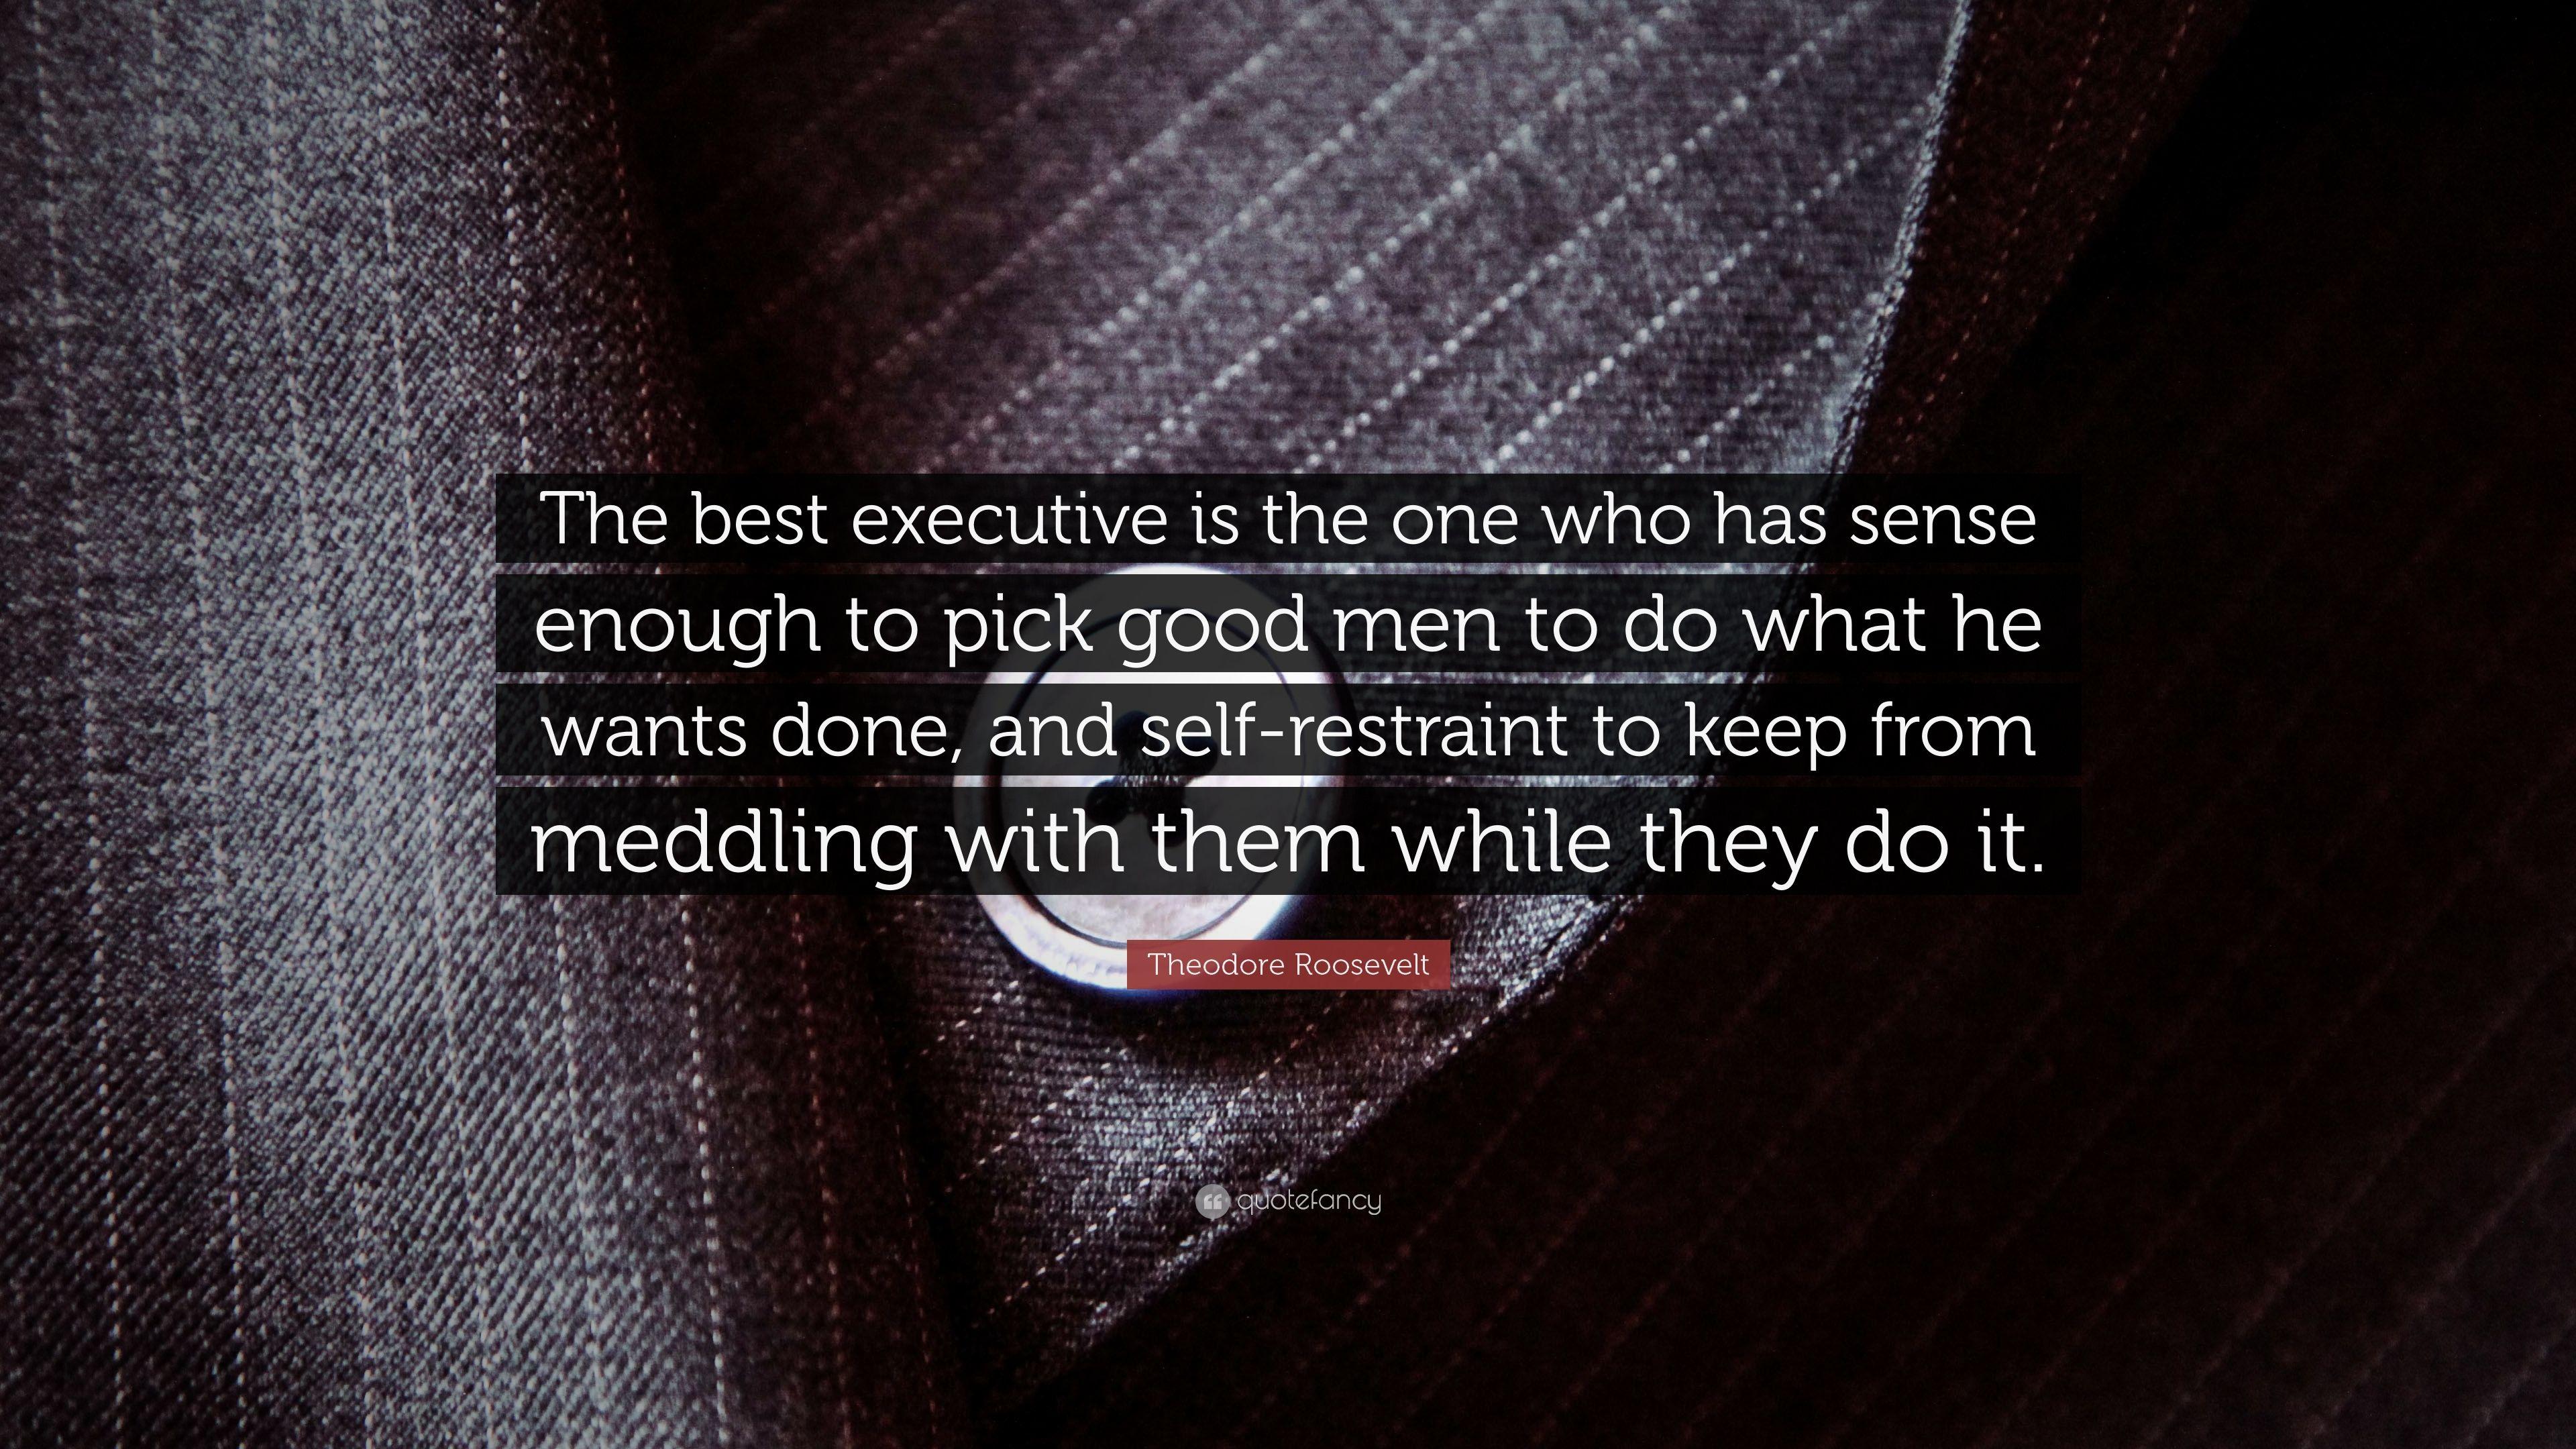 Theodore Roosevelt Quote: “The best executive is the one who has